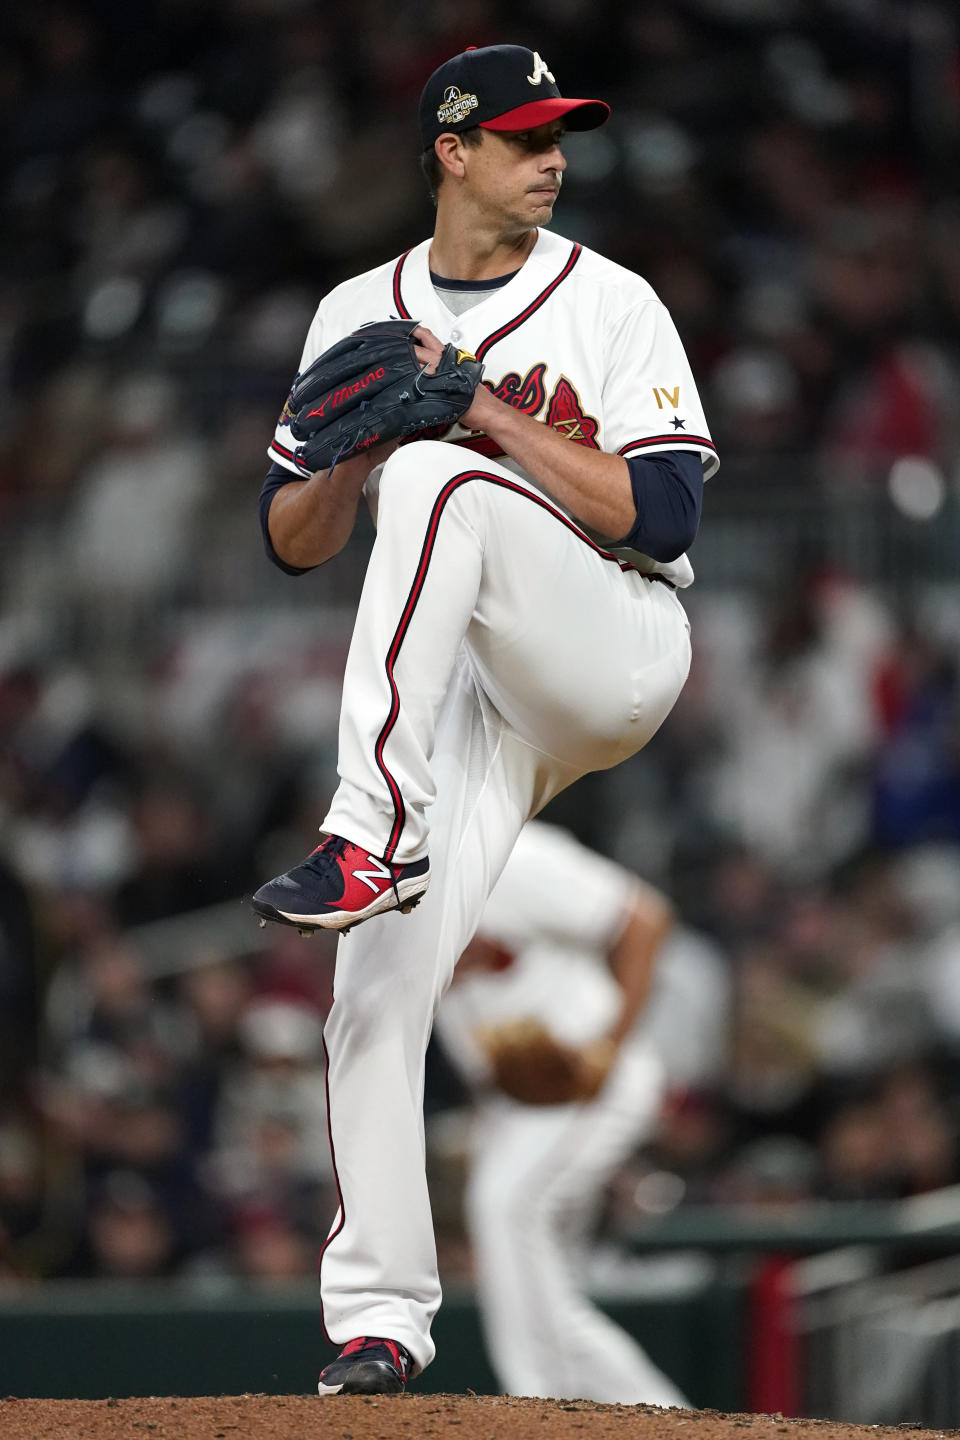 Atlanta Braves starting pitcher Charlie Morton (50) works against the Cincinnati Reds in the fourth inning of a baseball game Friday, April 8, 2022, in Atlanta. (AP Photo/John Bazemore)